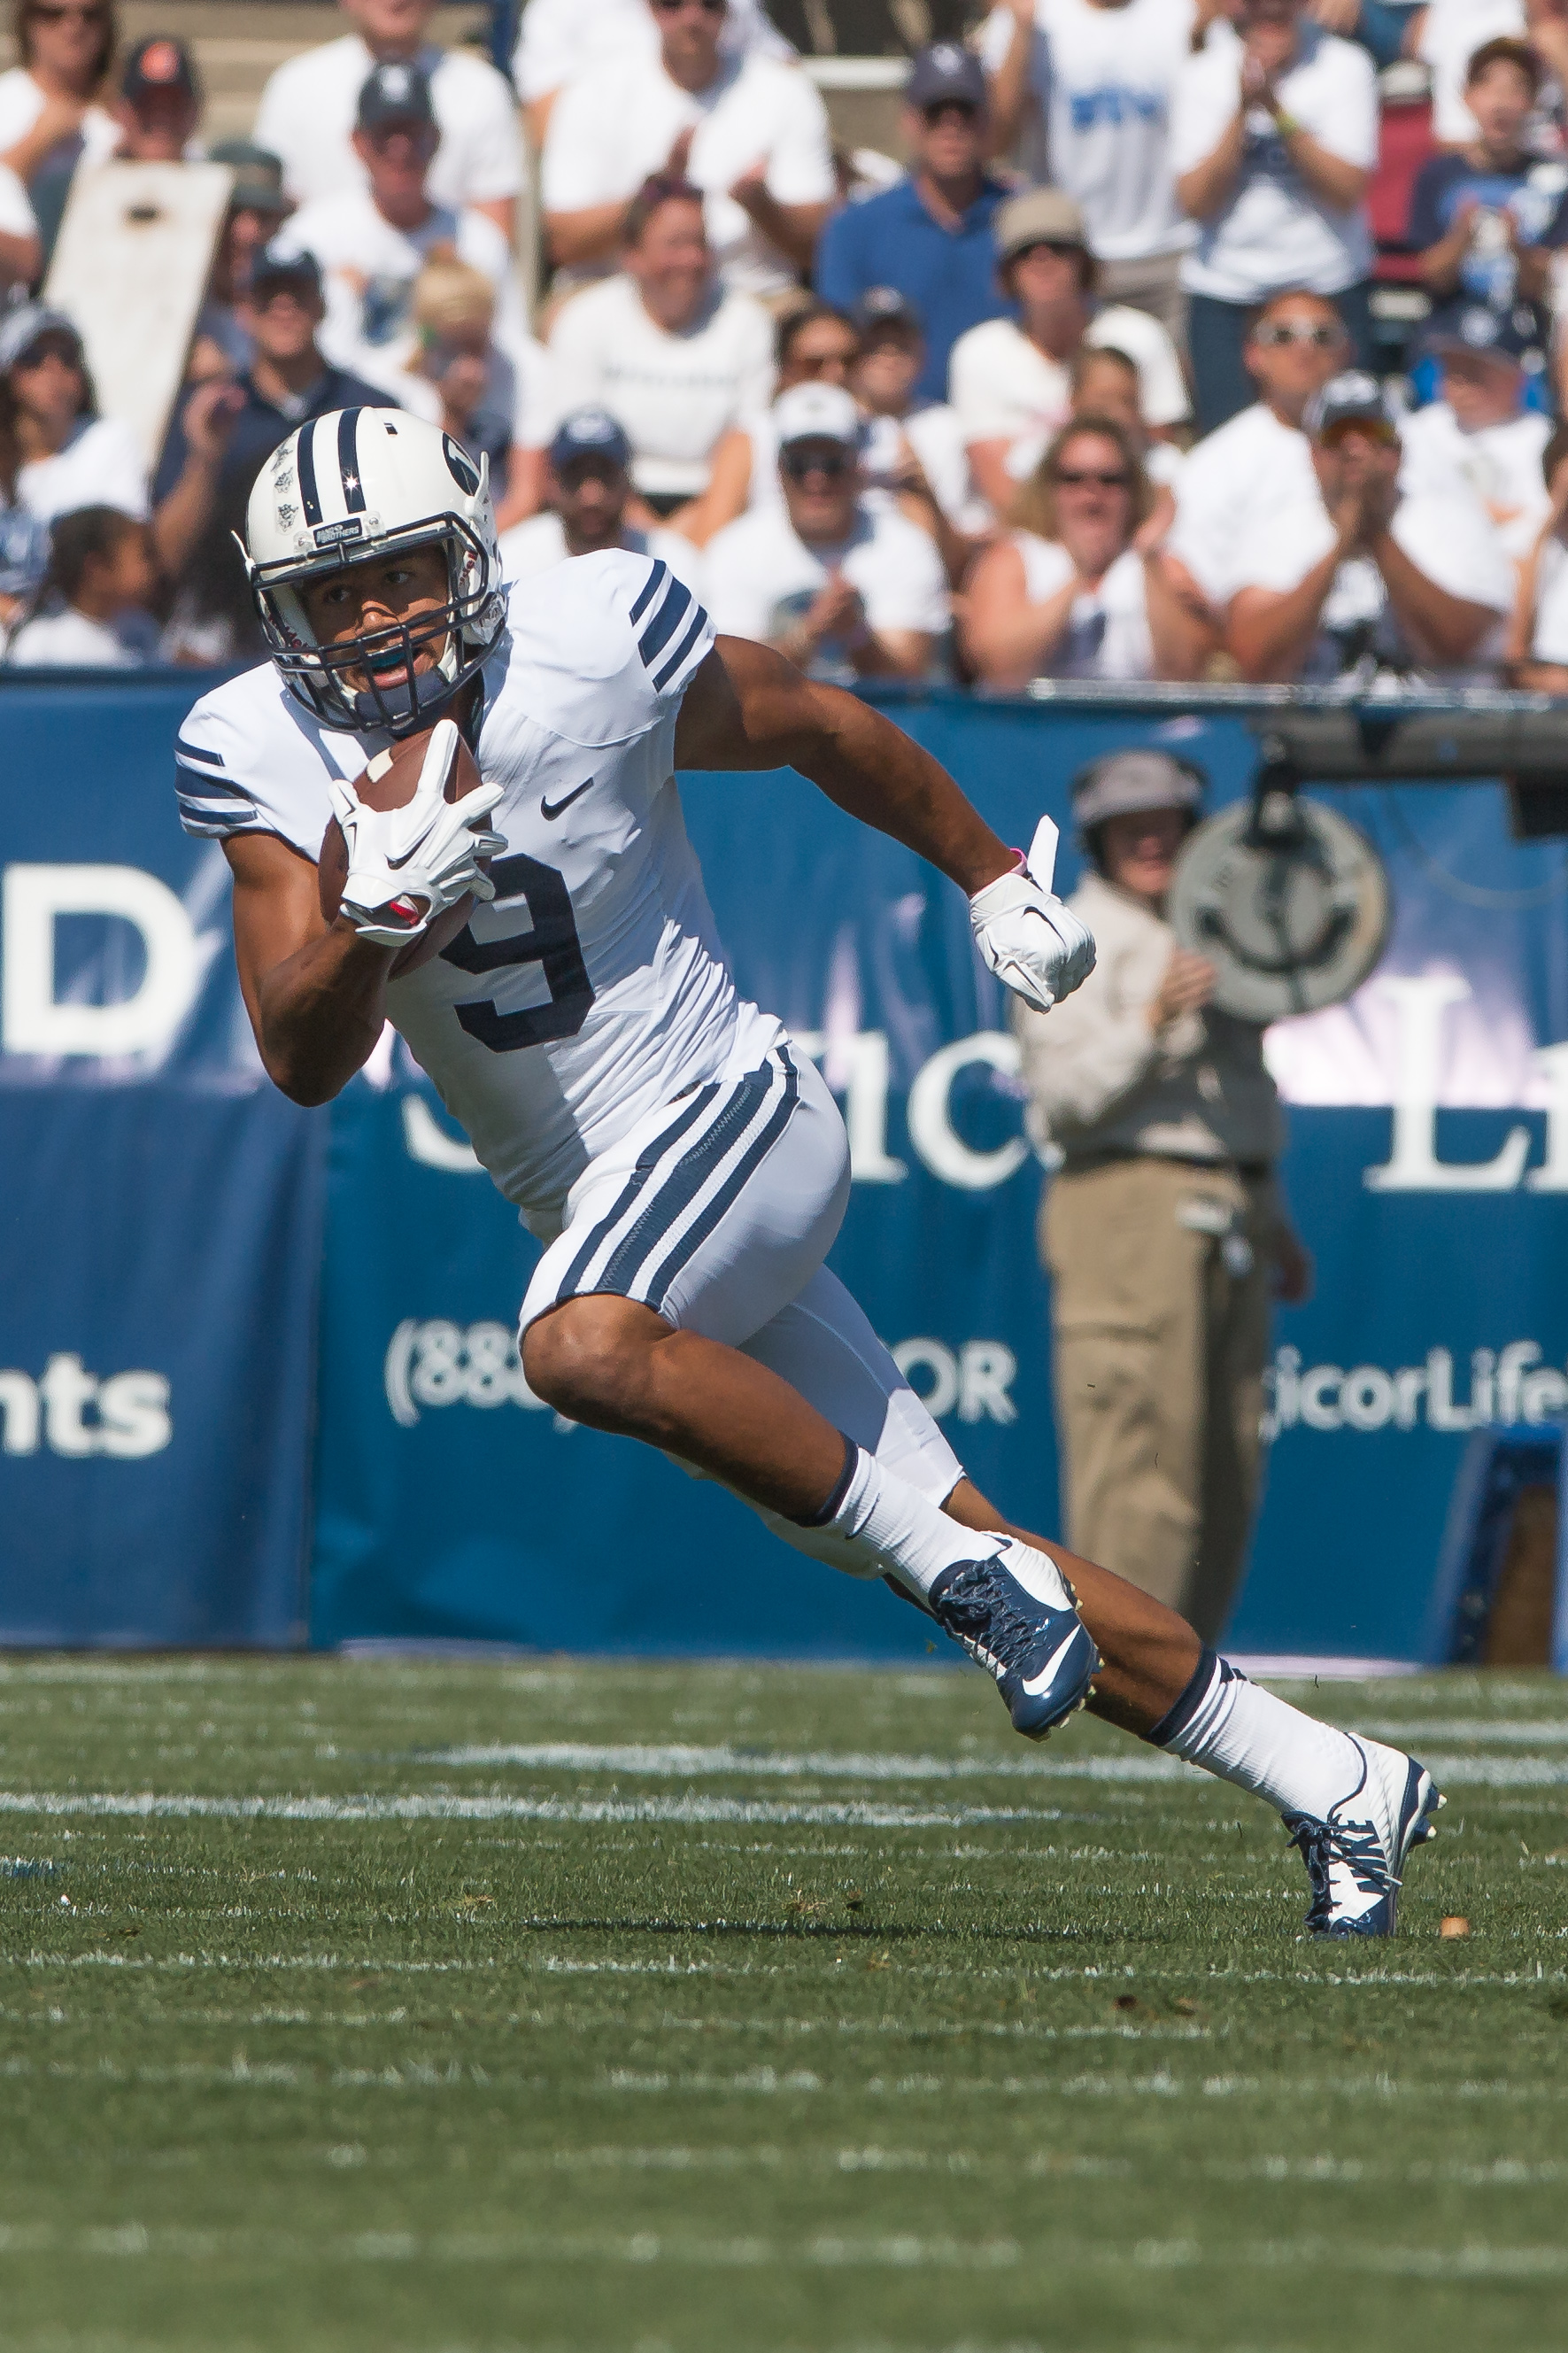 BYU football receiver Leslie is fueled by oppostion - The Daily